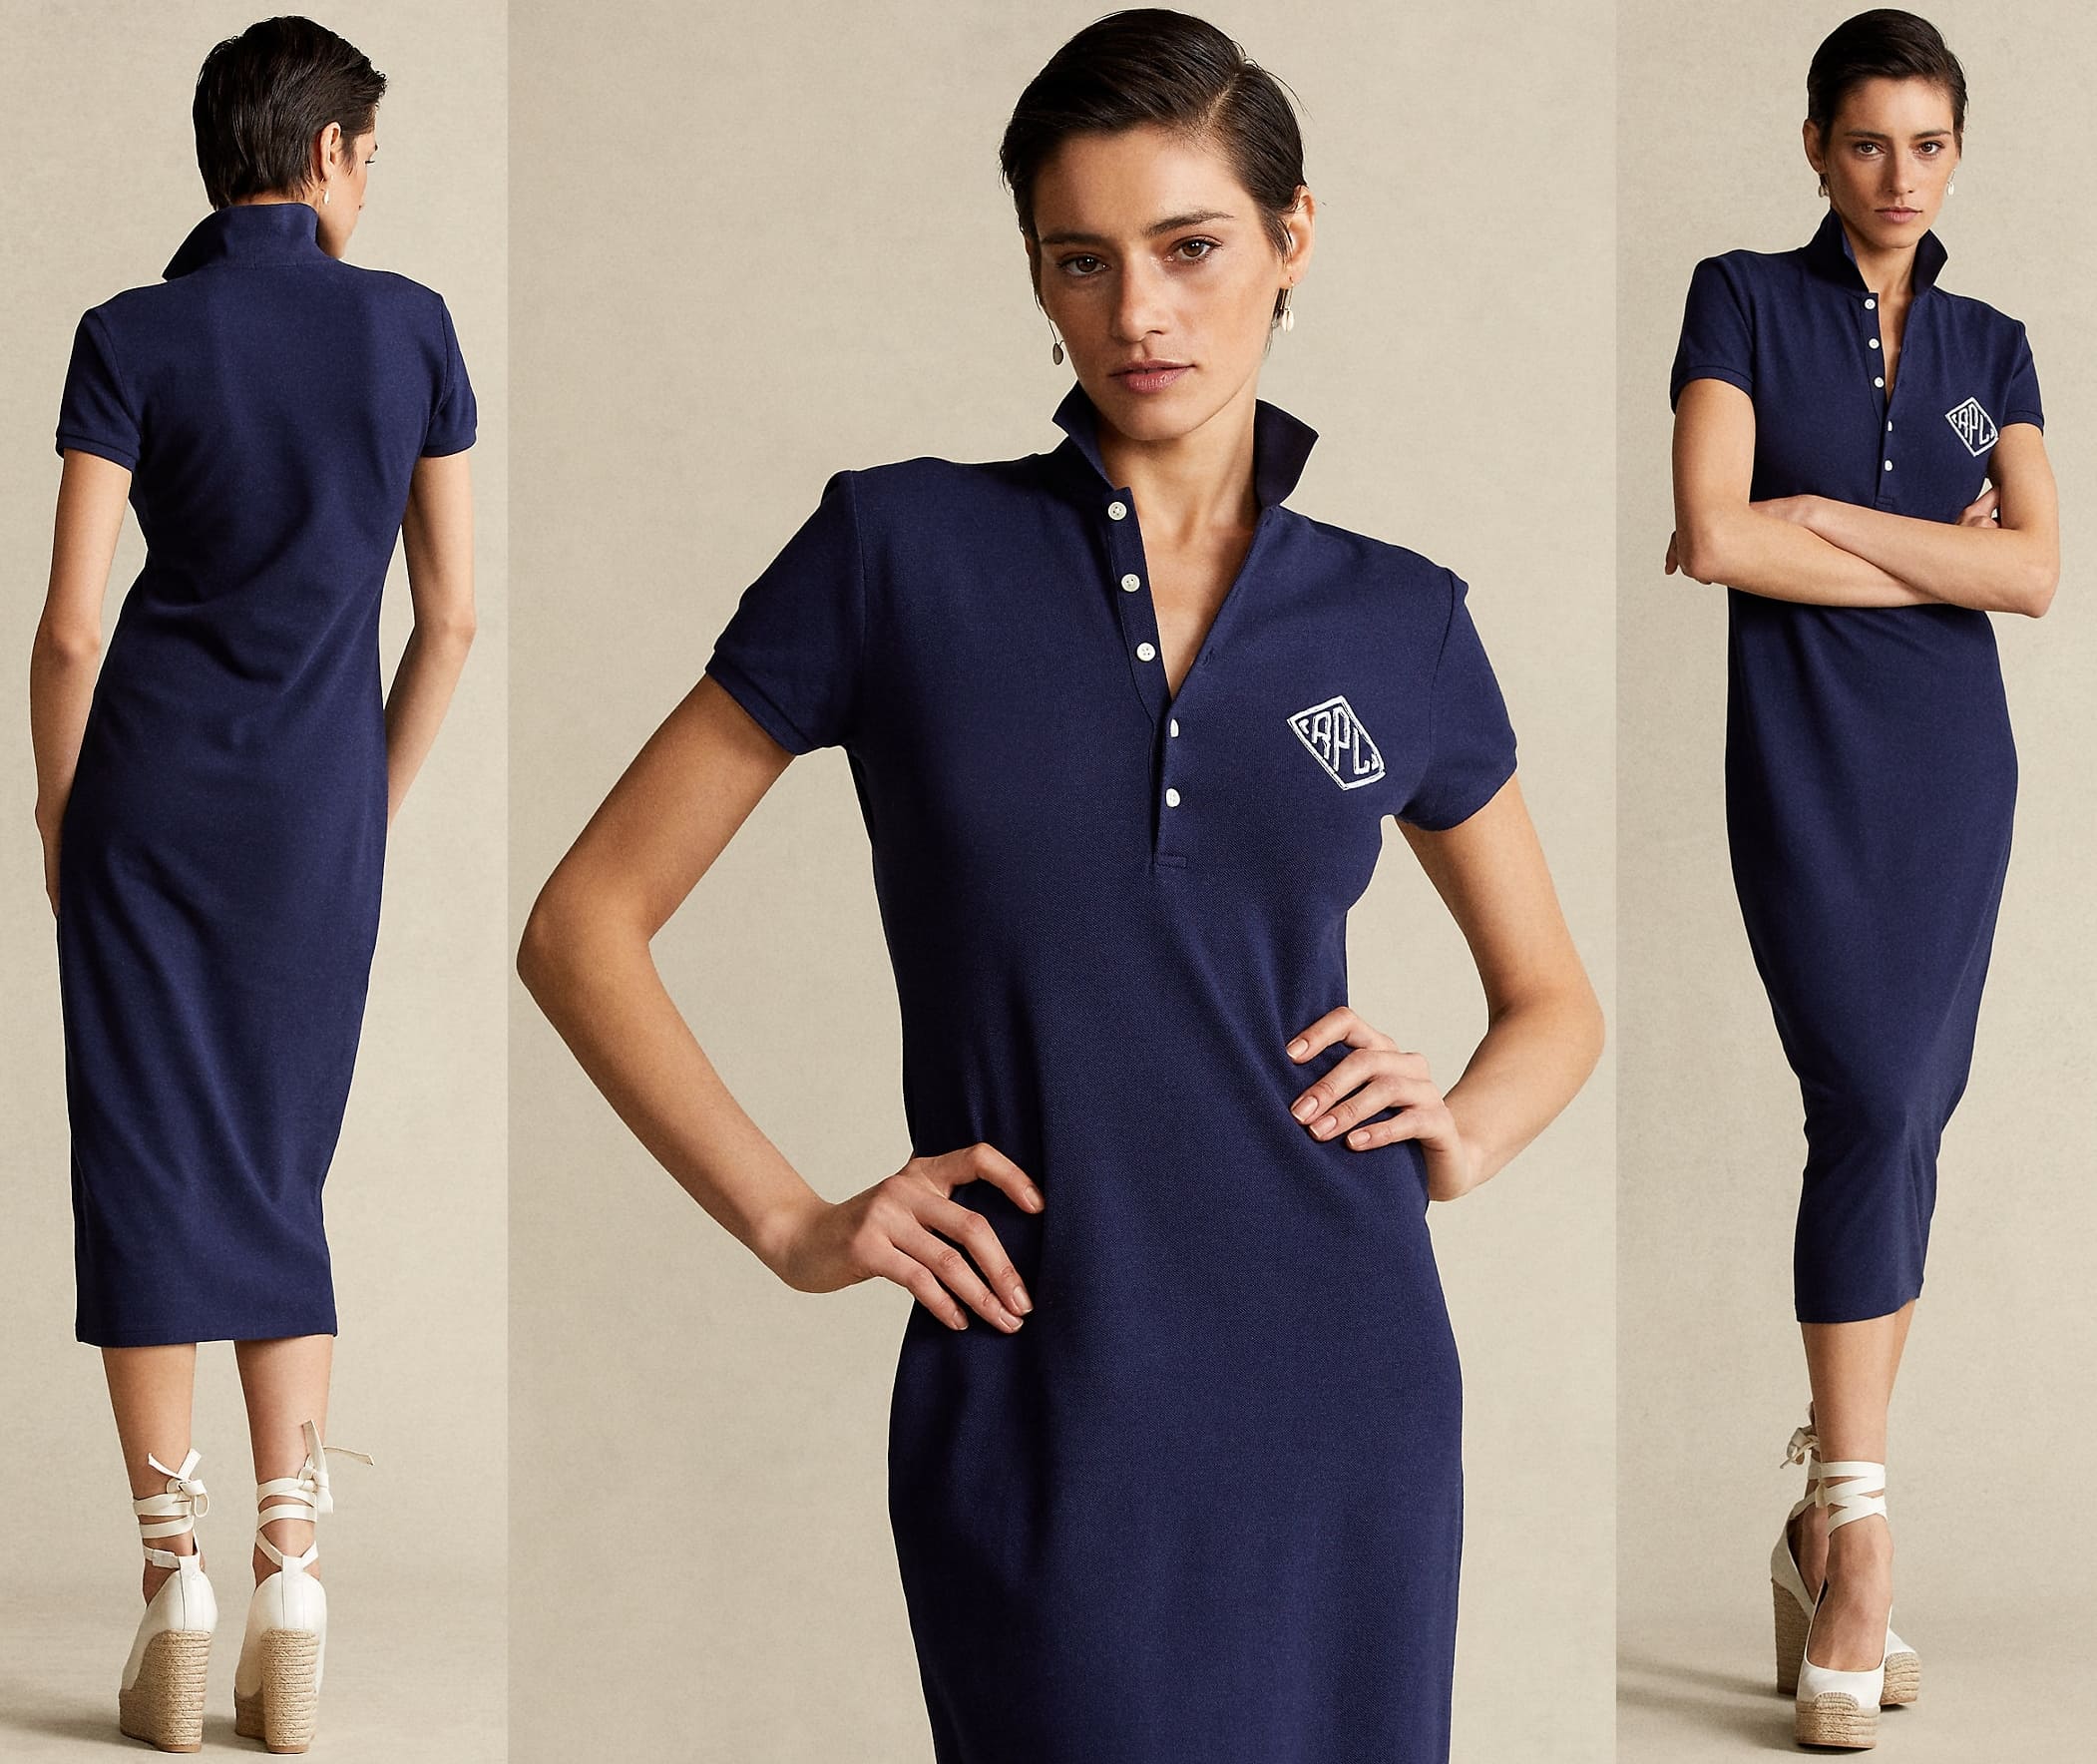 Presented in an elongated silhouette, this dress draws influence from Ralph Lauren's iconic Polo shirt